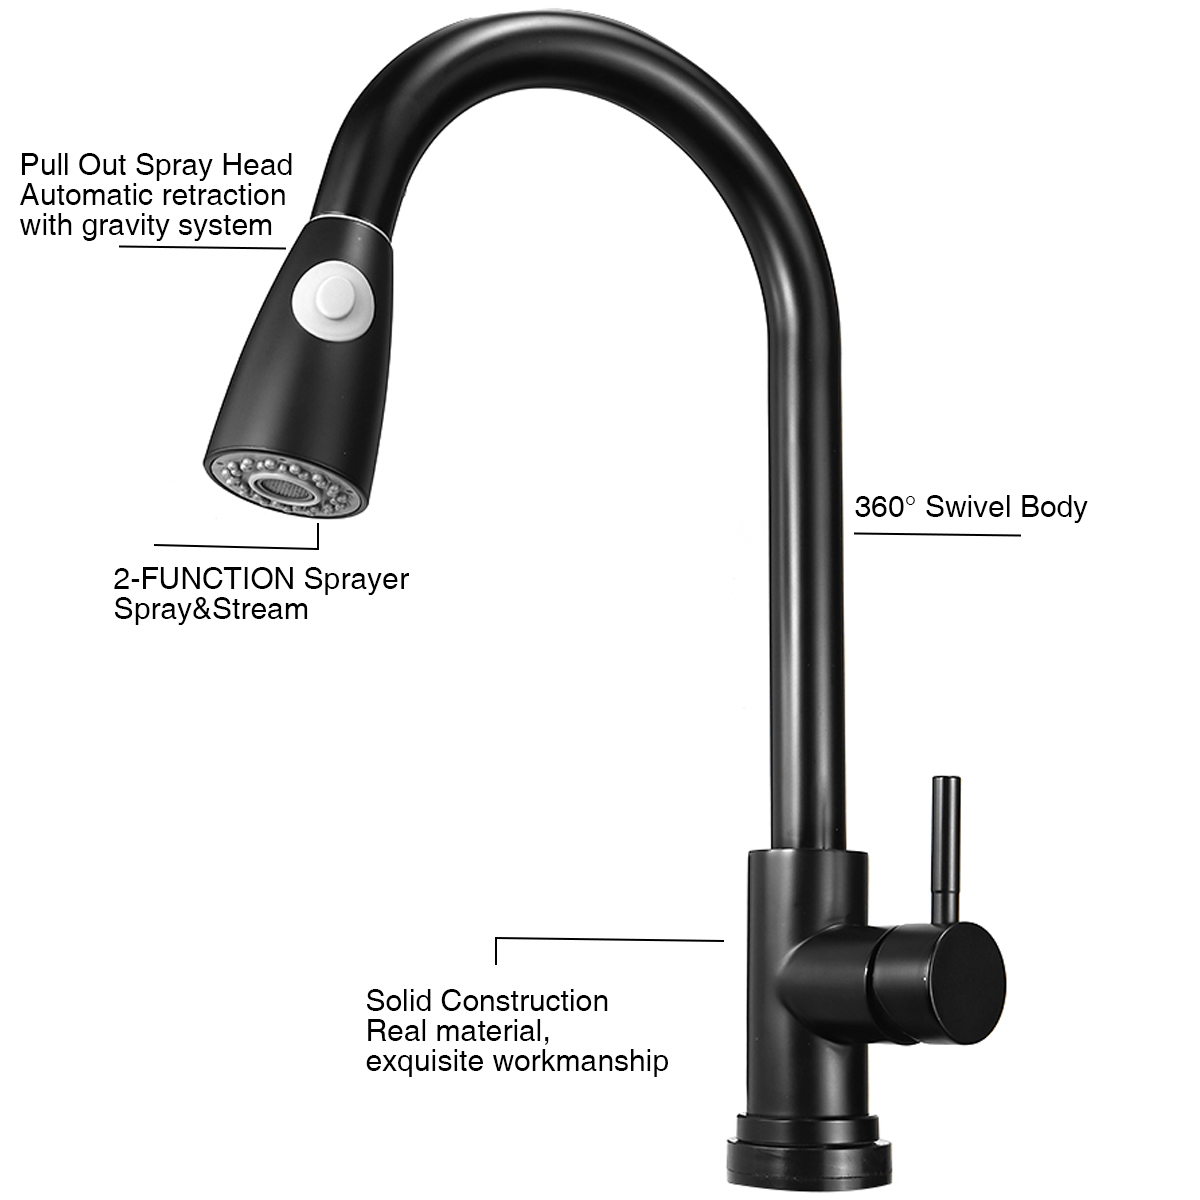 Kitchen Faucet Pull Down Kitchen Faucets Stainless Steel Kitchen Faucet with Pull Down Sprayer Modern Single Handle Kitchen Bar Faucet Mixer Tap - image 4 of 10